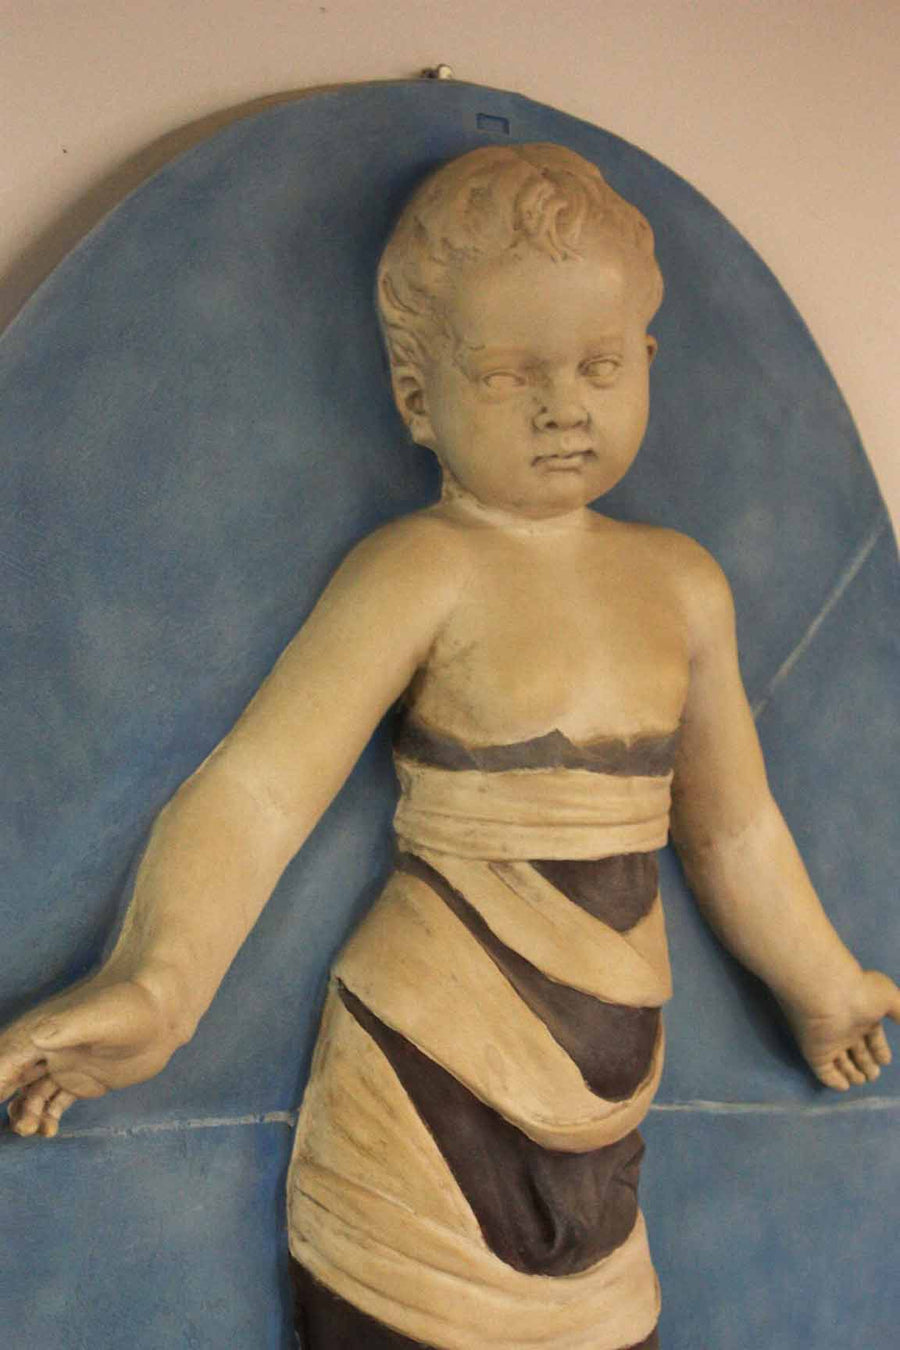 closeup photo of plaster cast relief of child with mummy-like wrappings on a blue oval background on a tan-colored wall